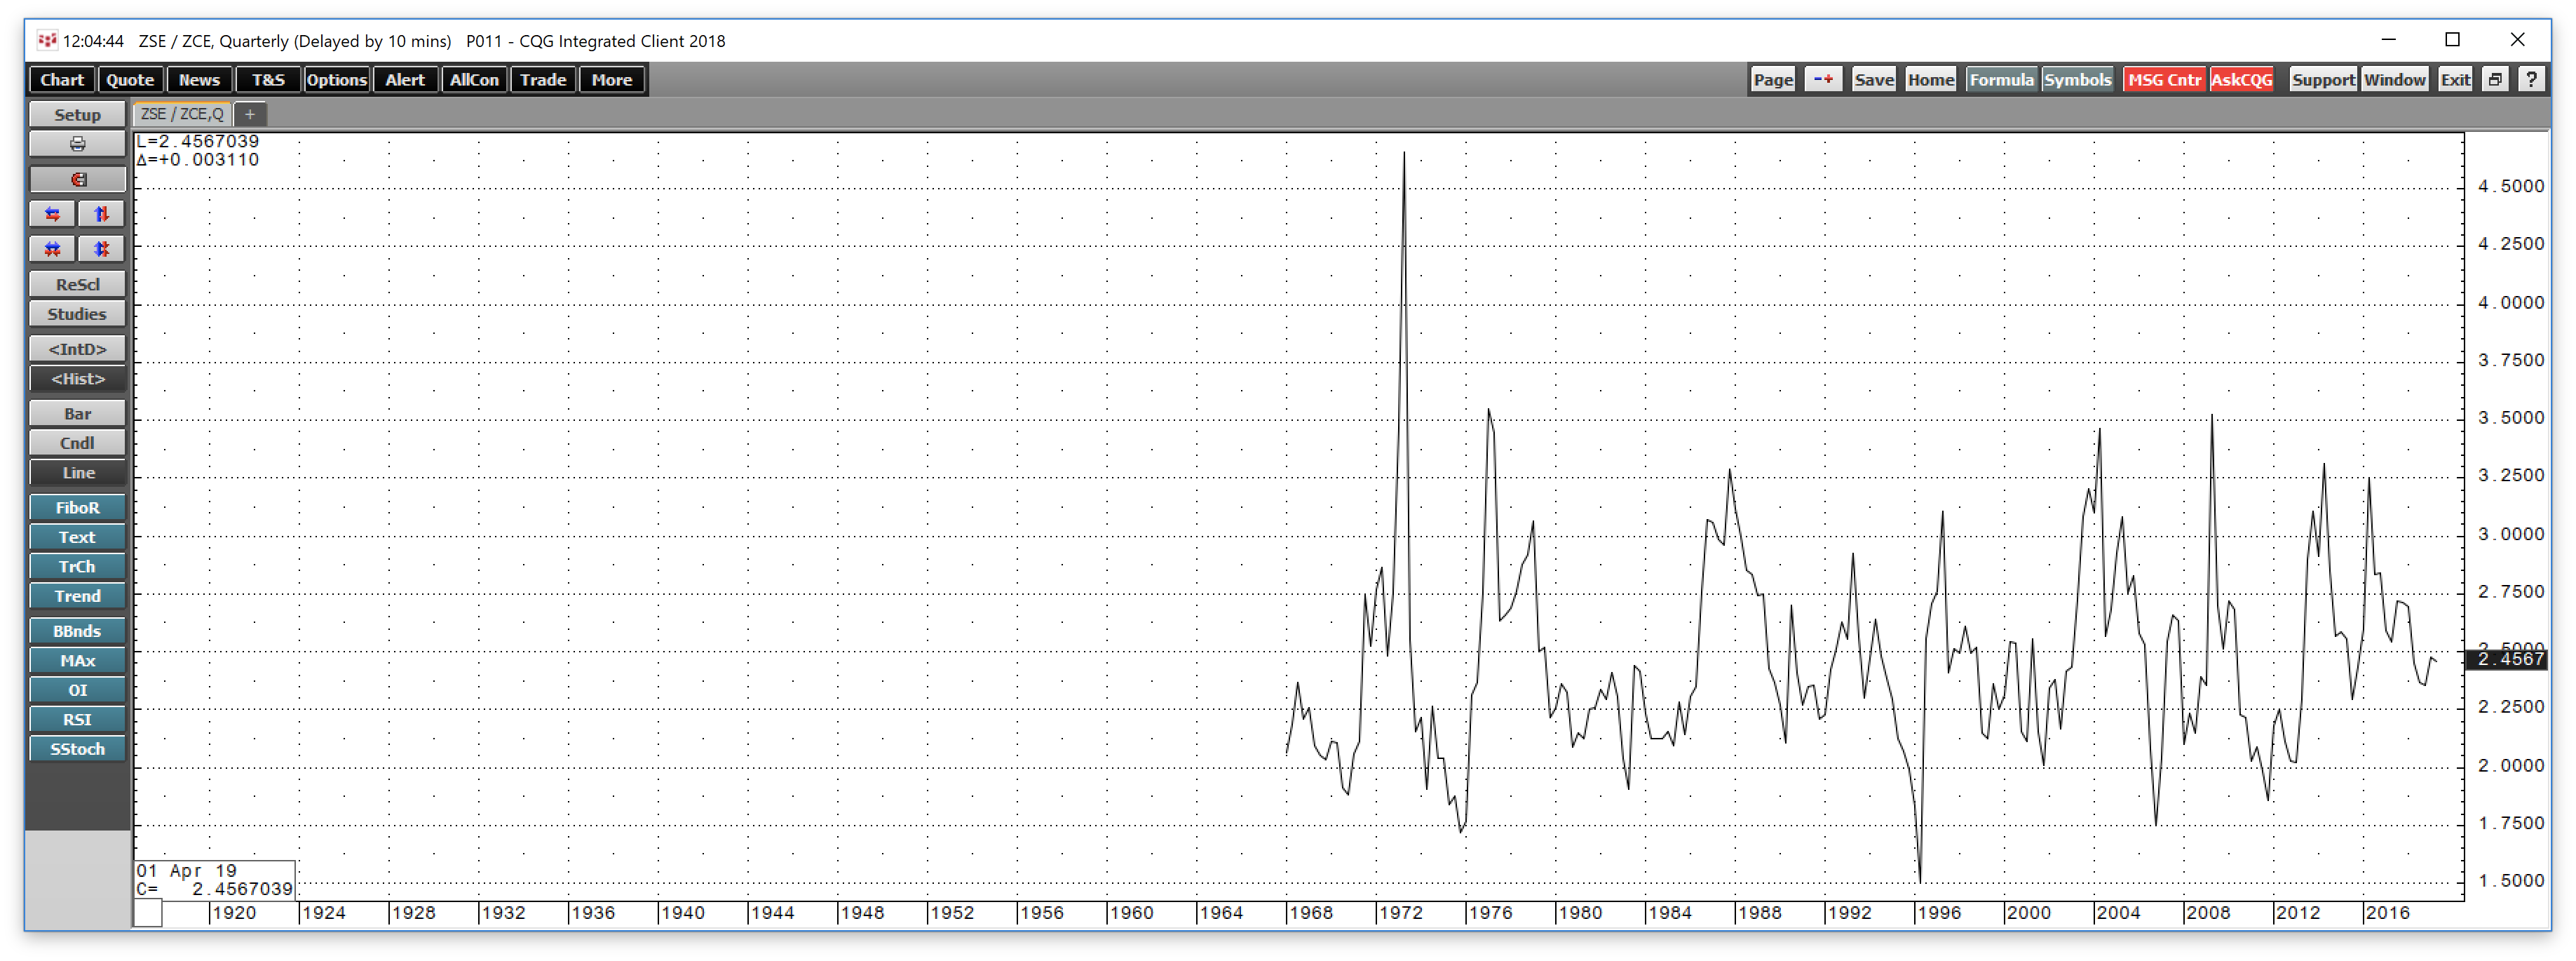 Soybean Meal Price Chart